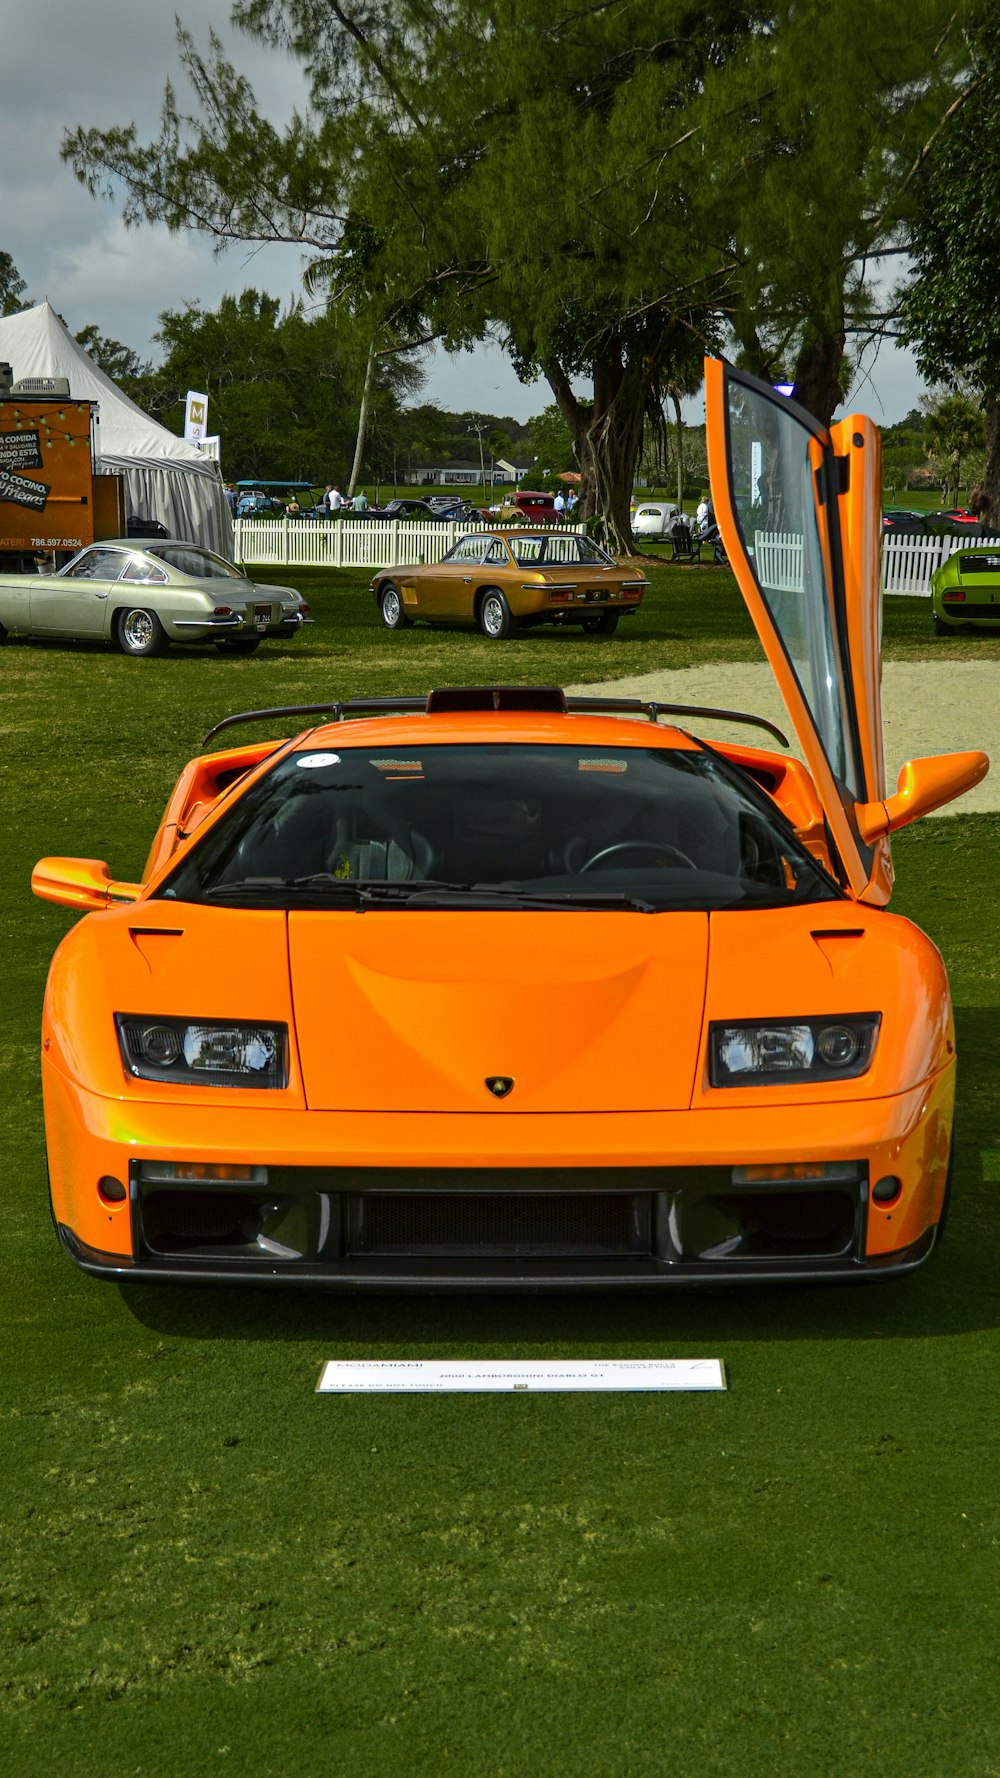 a bright orange sports car parked in the grass